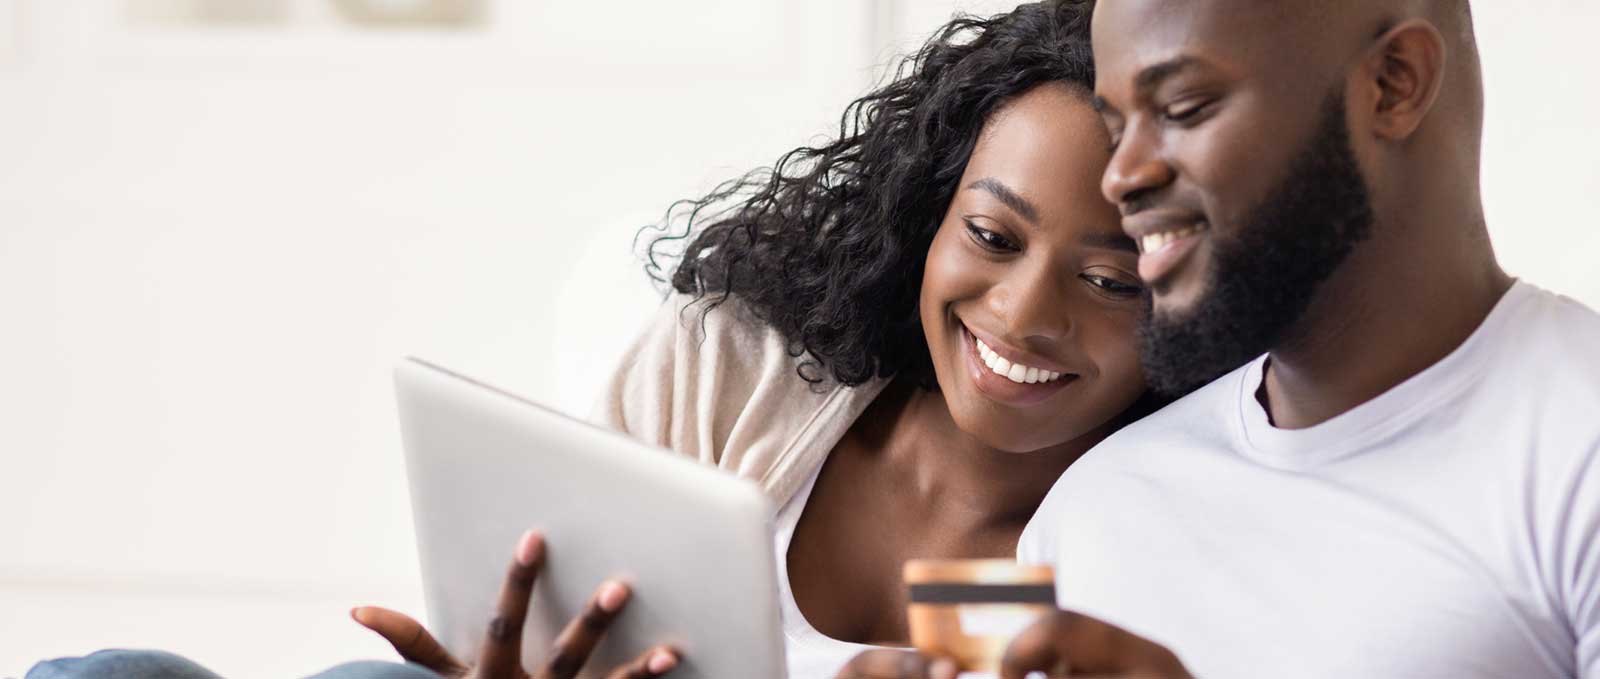 Young couple making an online purchase together thanks to persuasive marketing copywriting on the company’s website